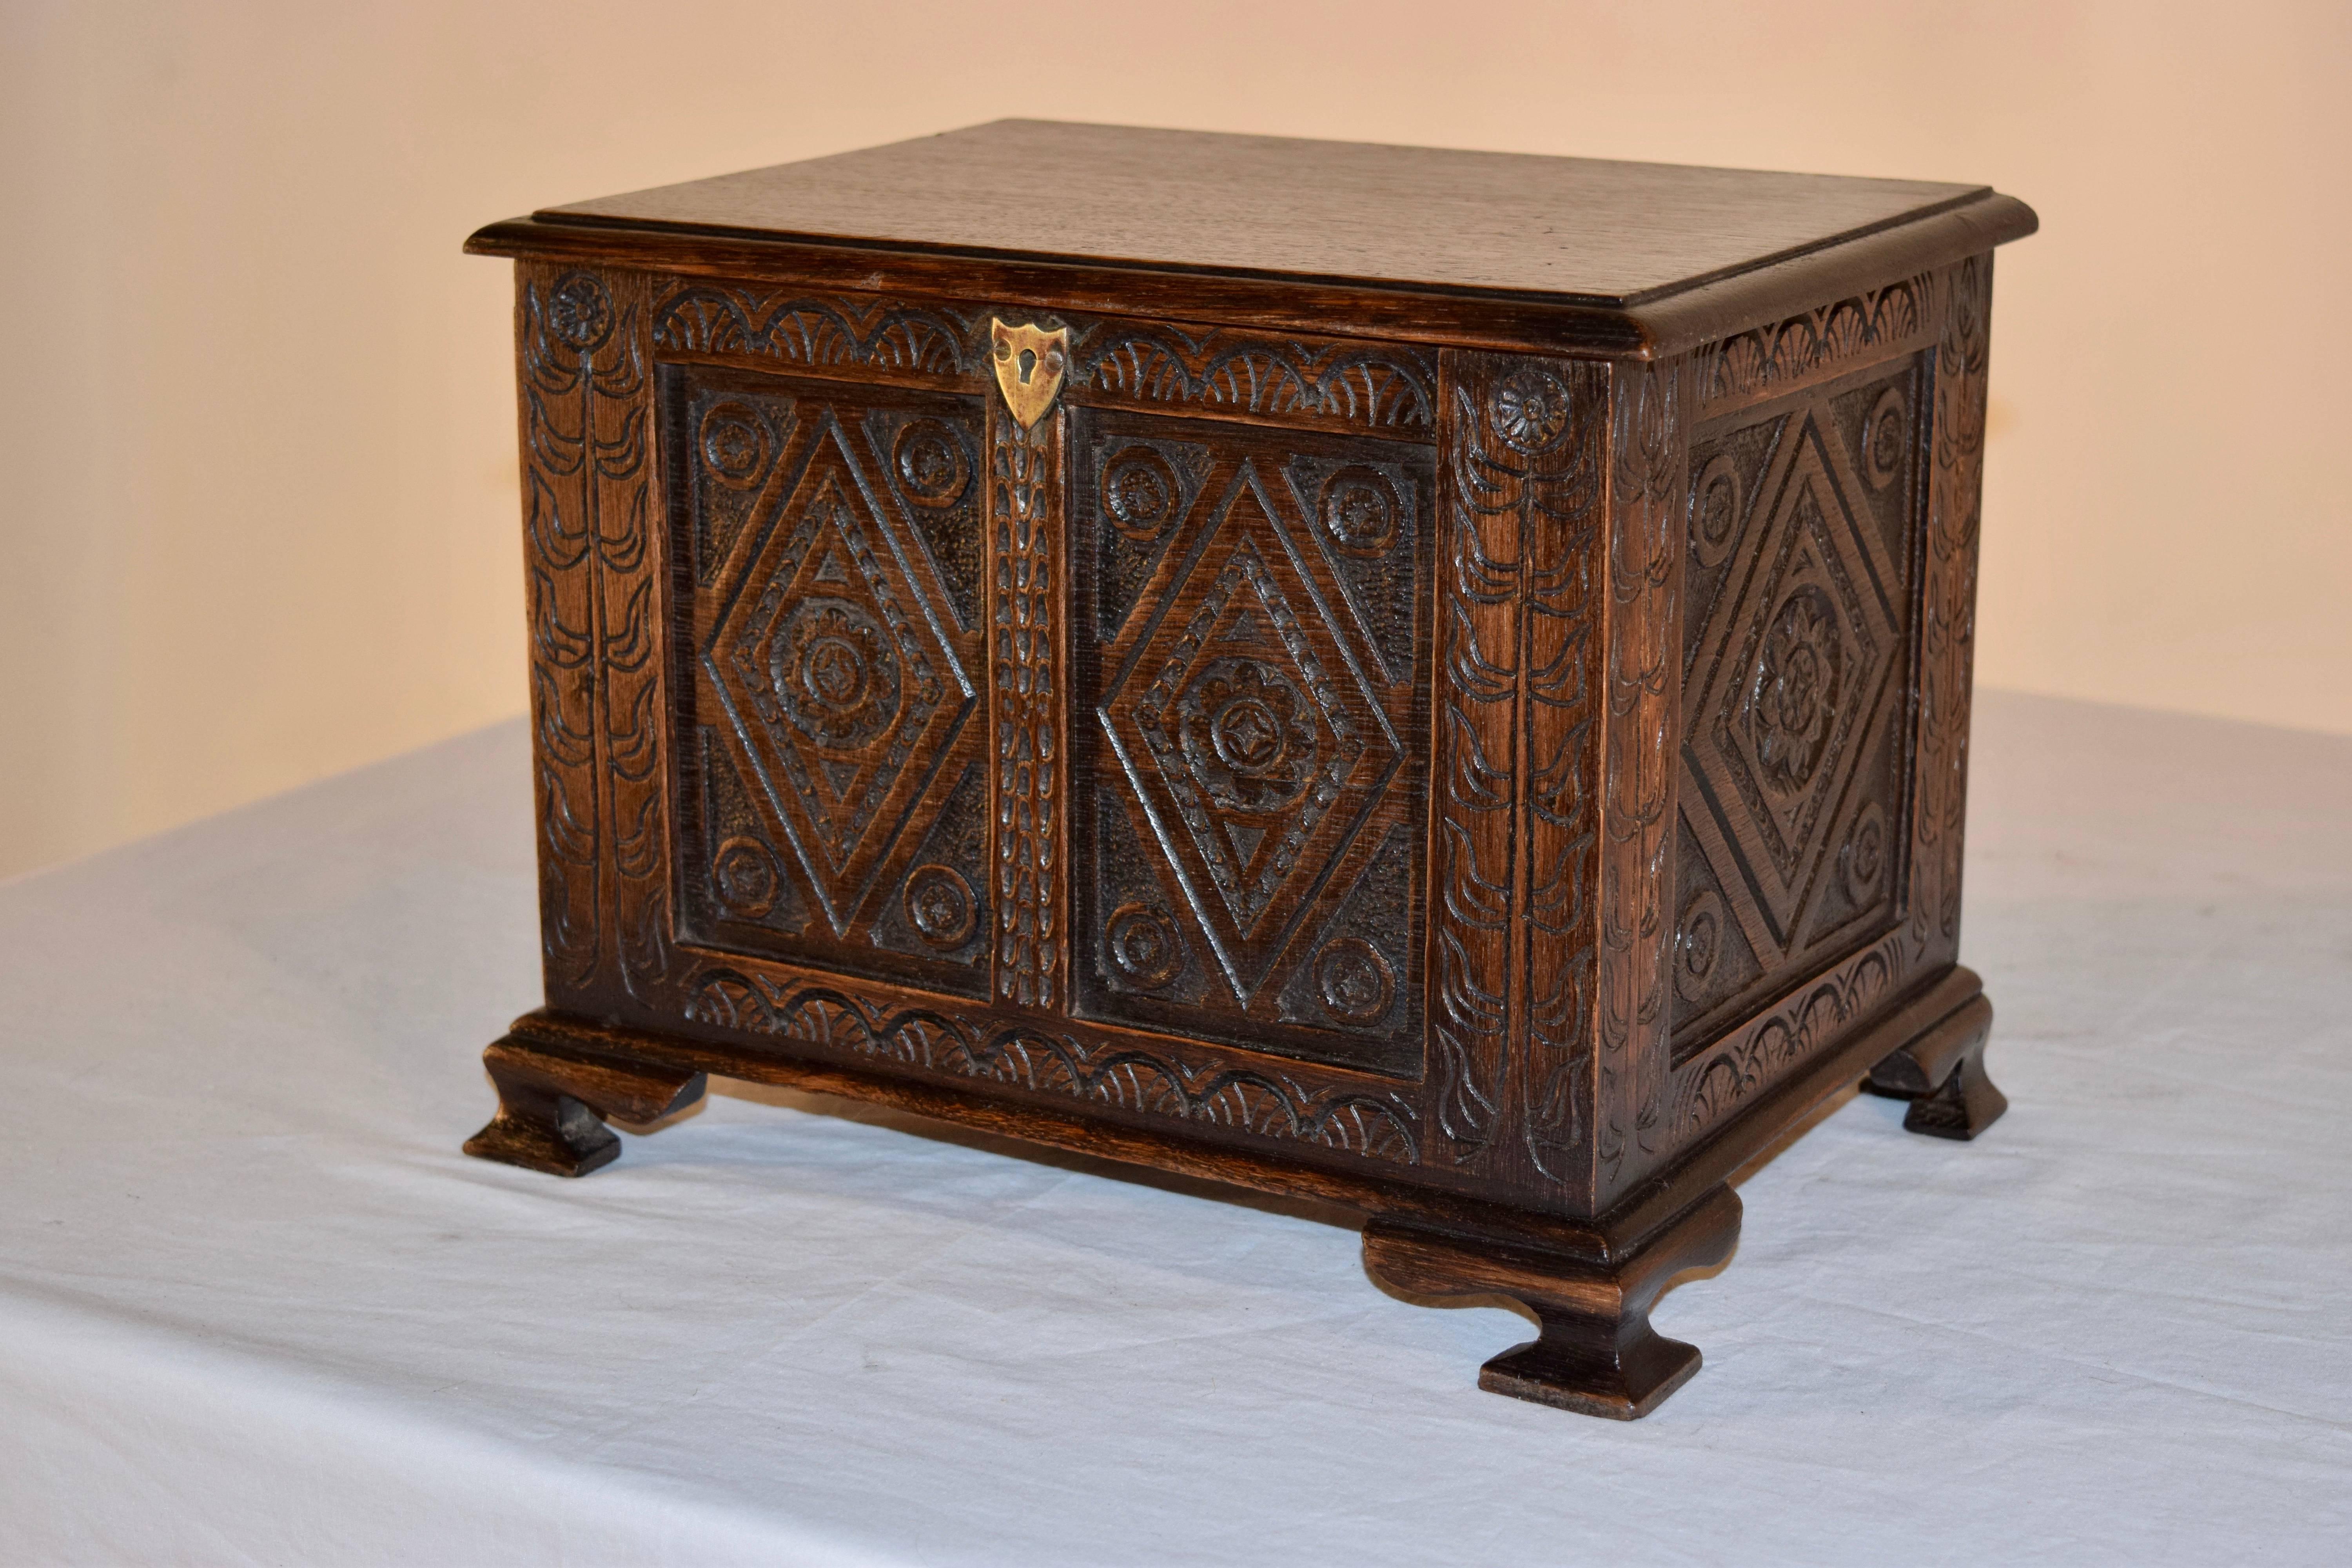 19th century carved miniature blanket chest with a beveled edge around the top, which is hinged in the back and lifts to reveal an open compartment. The sides and front are raised paneled and have wonderful hand-carved decorations. Raised on bracket